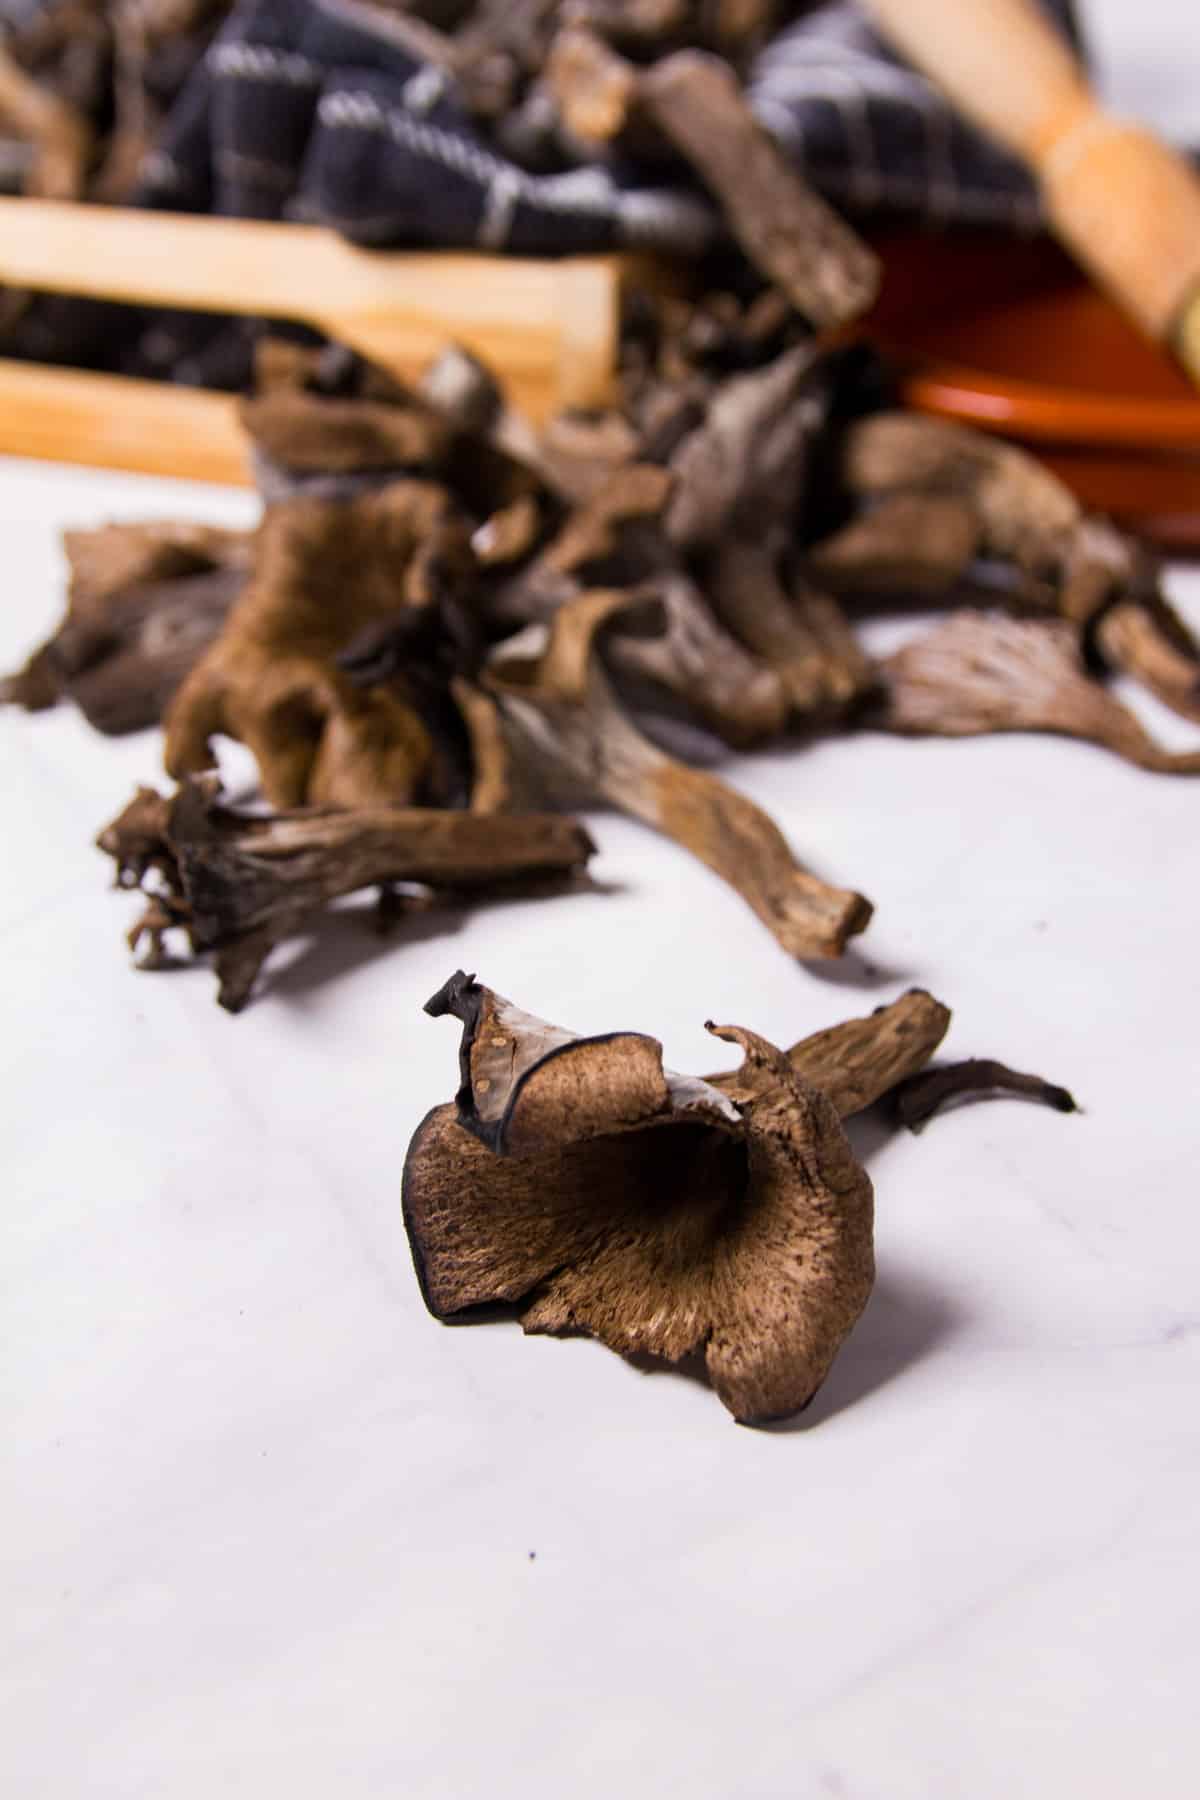 A black trumpet mushroom on the table with more trumpets in the background.